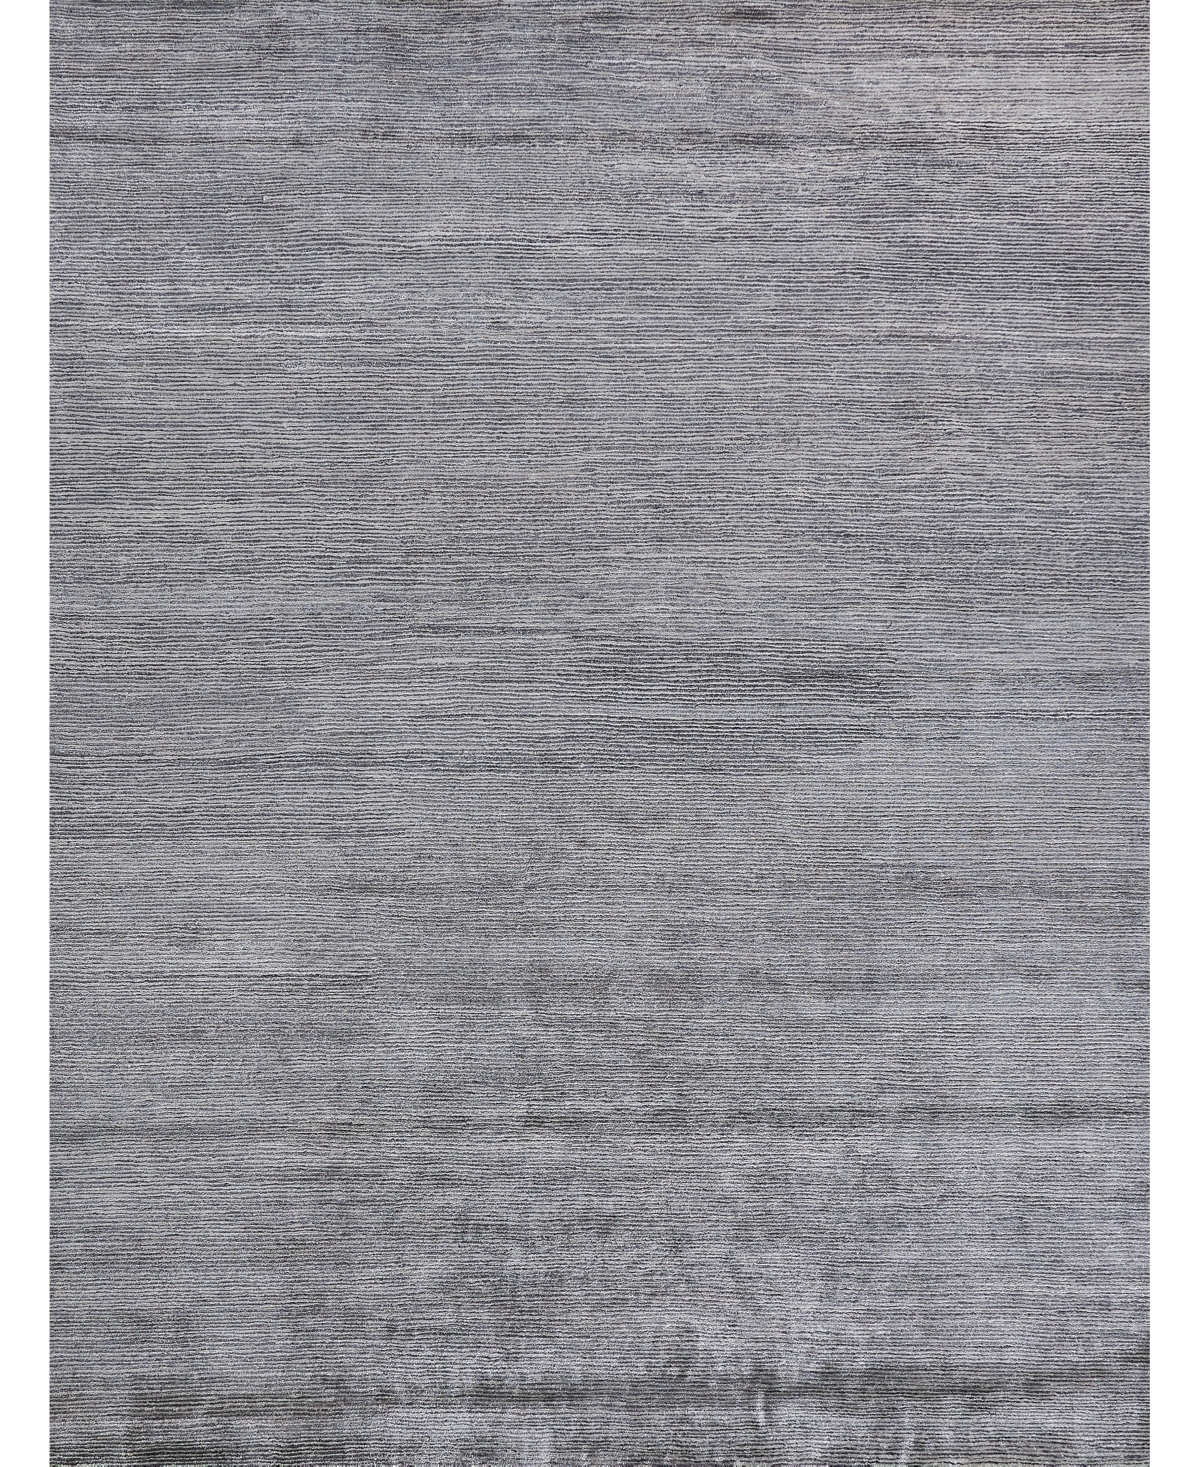 Exquisite Rugs Crush TES4302 9' x 12' Area Rug - Silver Tone